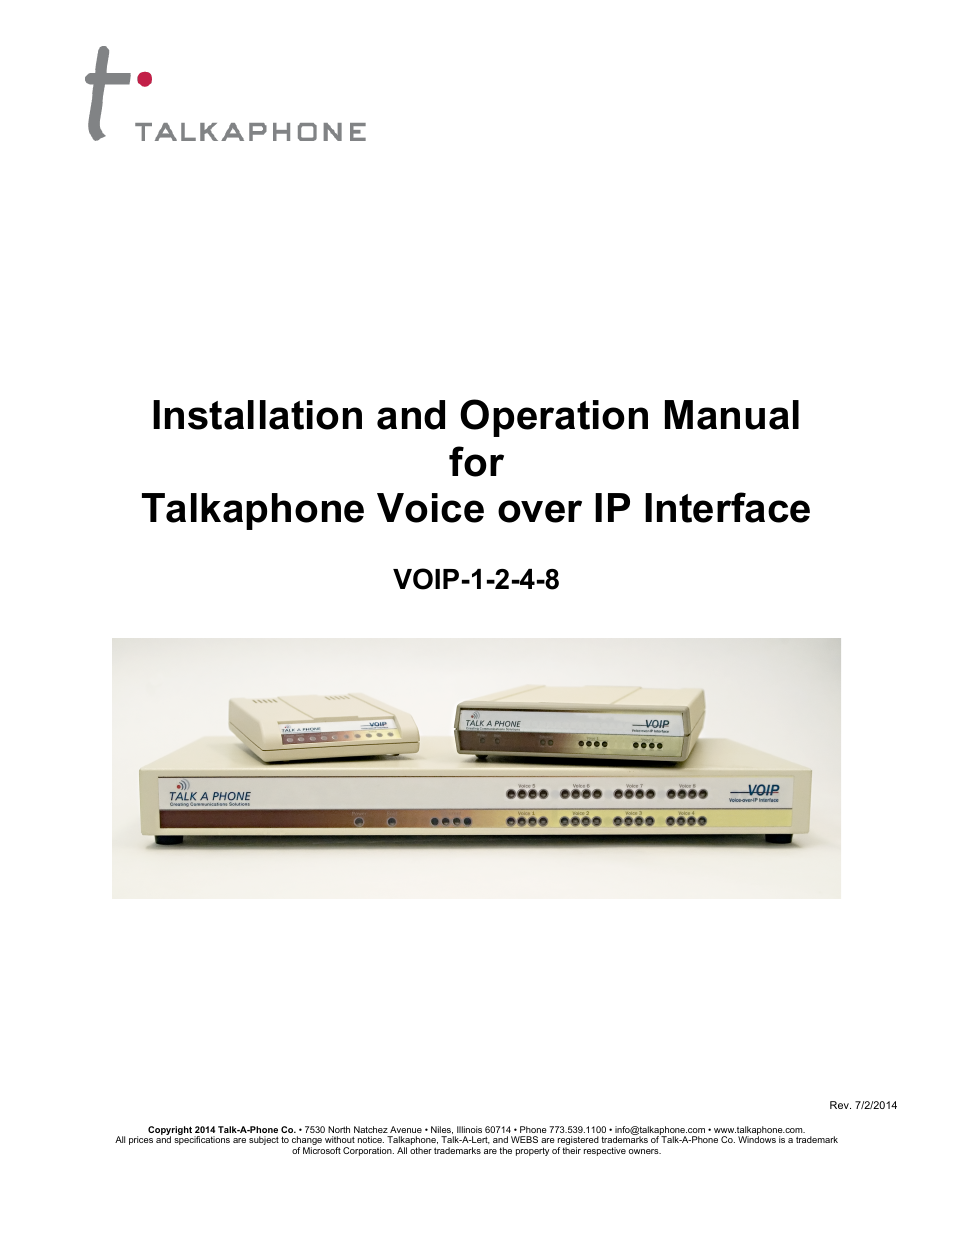 VOIP-4 VoIP Interface (4 channels)